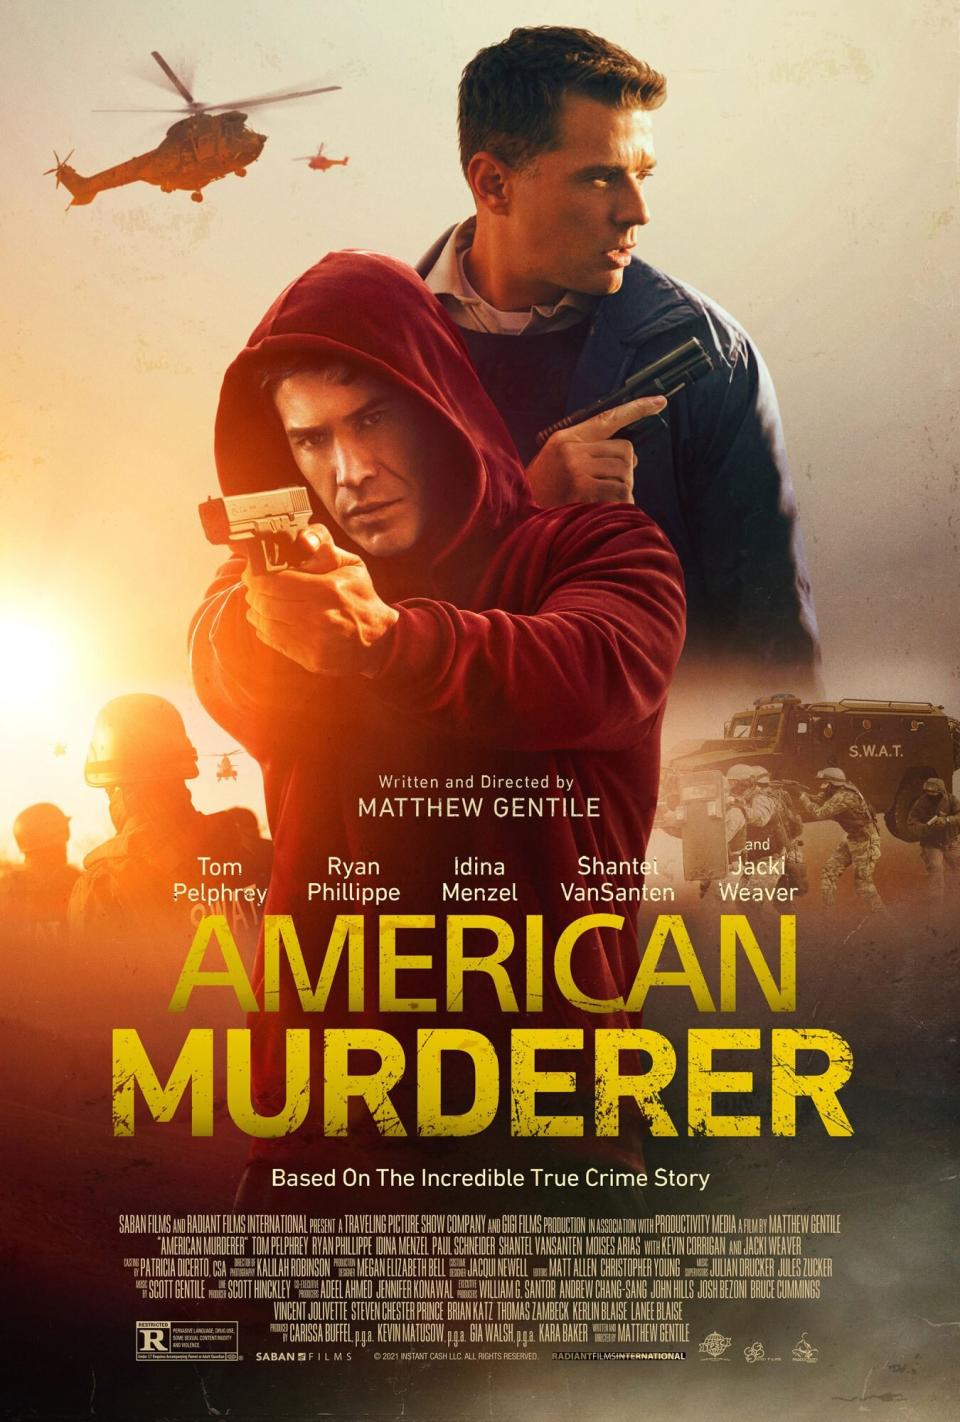 American Murderer Trailer Debut see attached from this dropbox. Courtesy of Saban Films